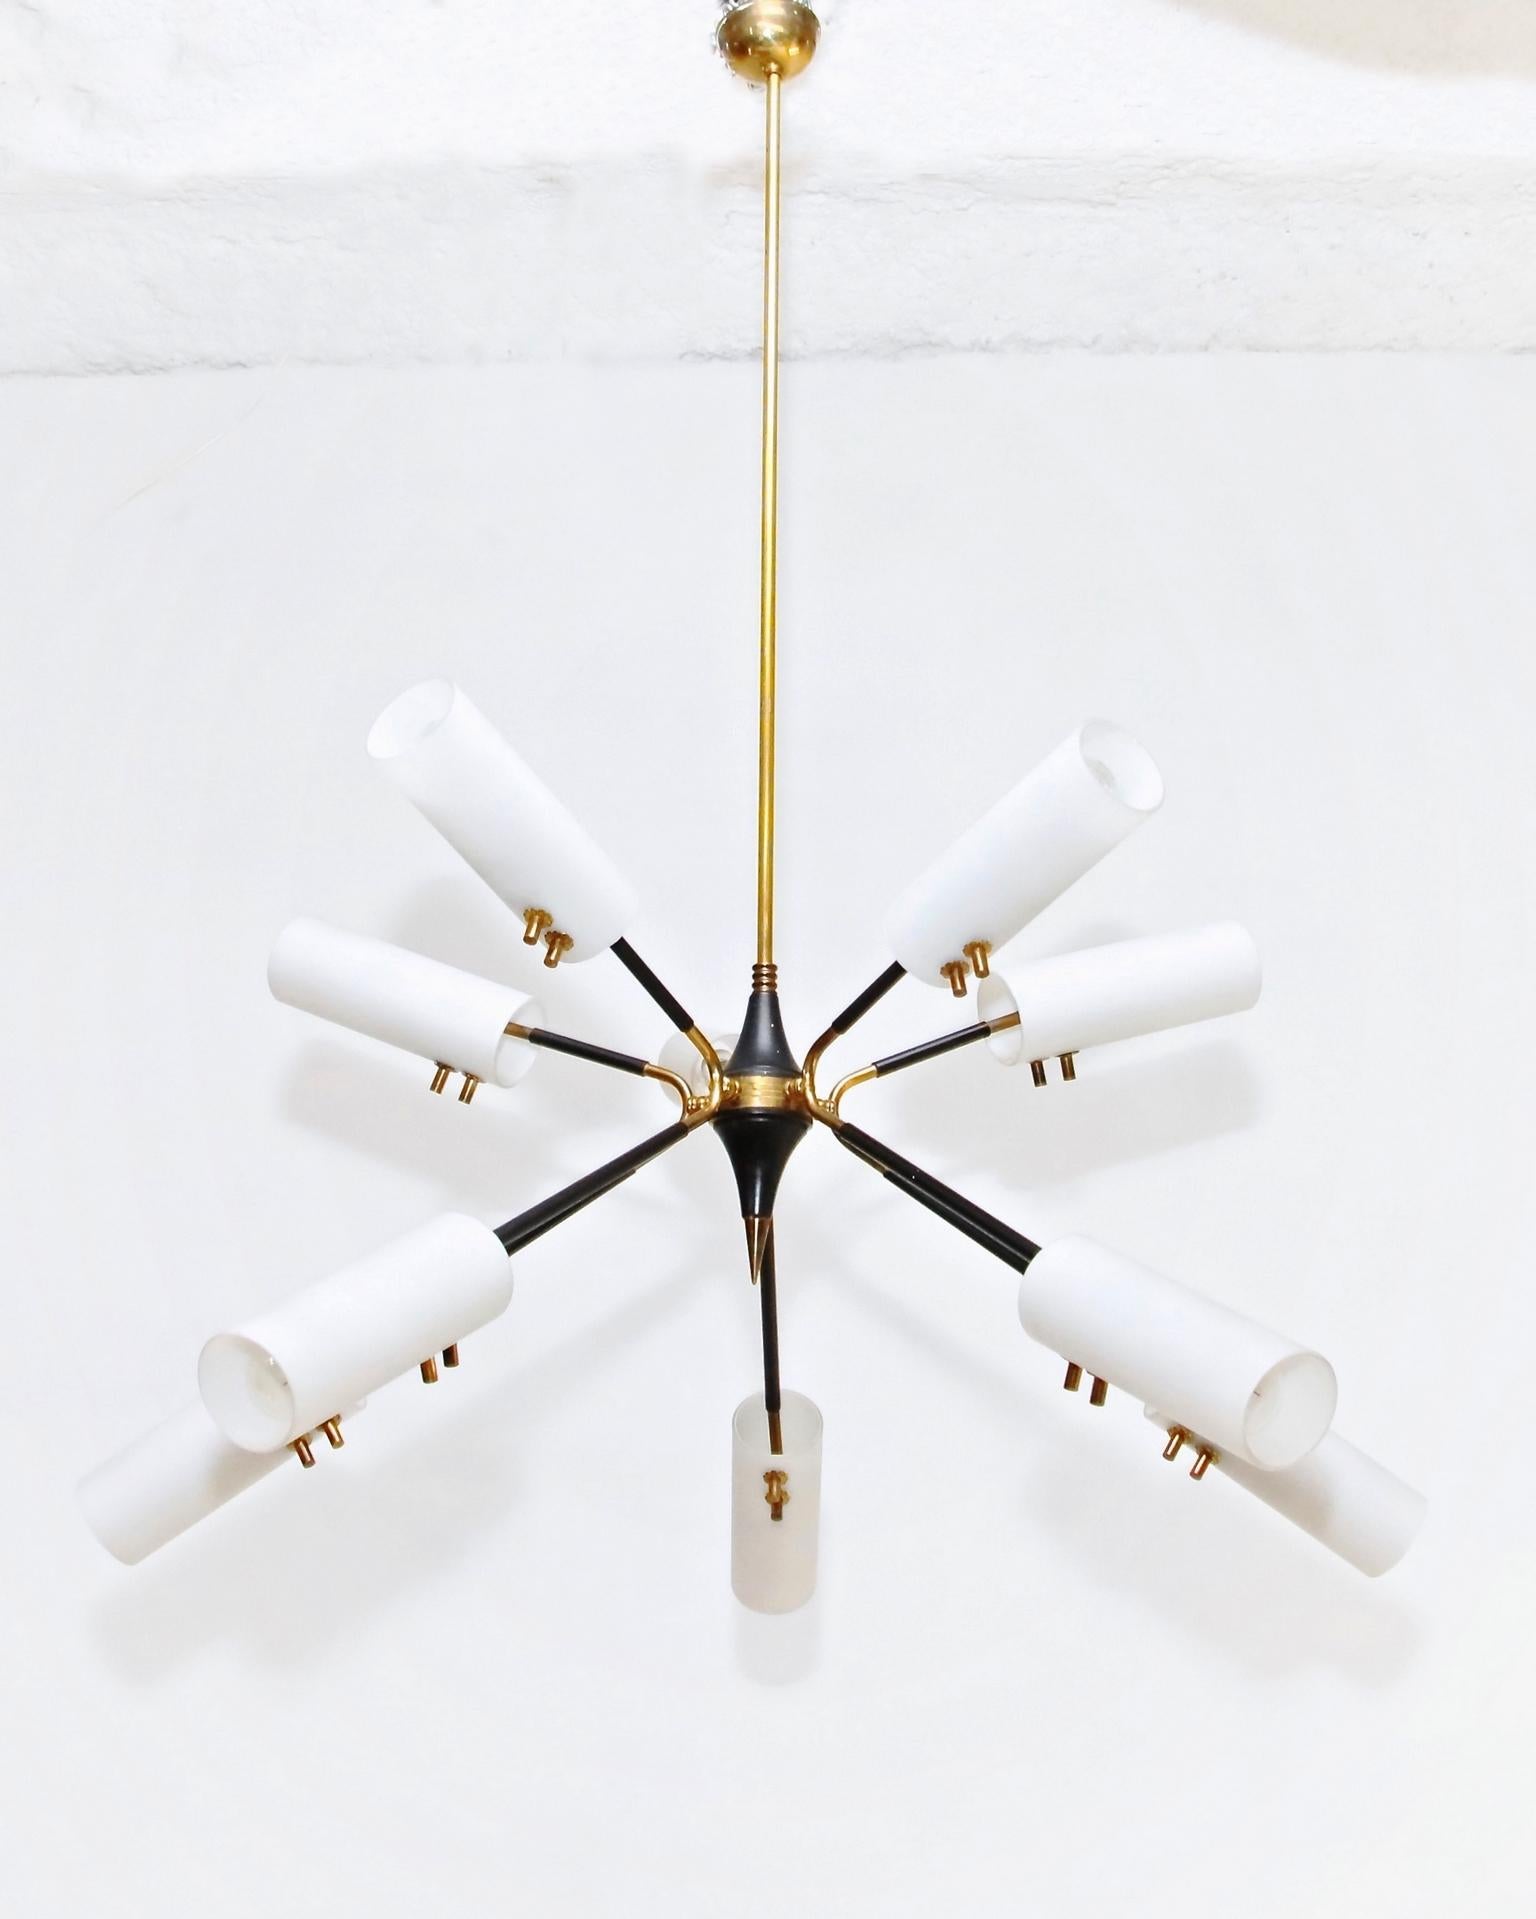 A 1950s chandelier sputnik style with a black powder coated structure, details in brass and lampshades in opaline glass. There is a total number of 10 lights in the lamp.